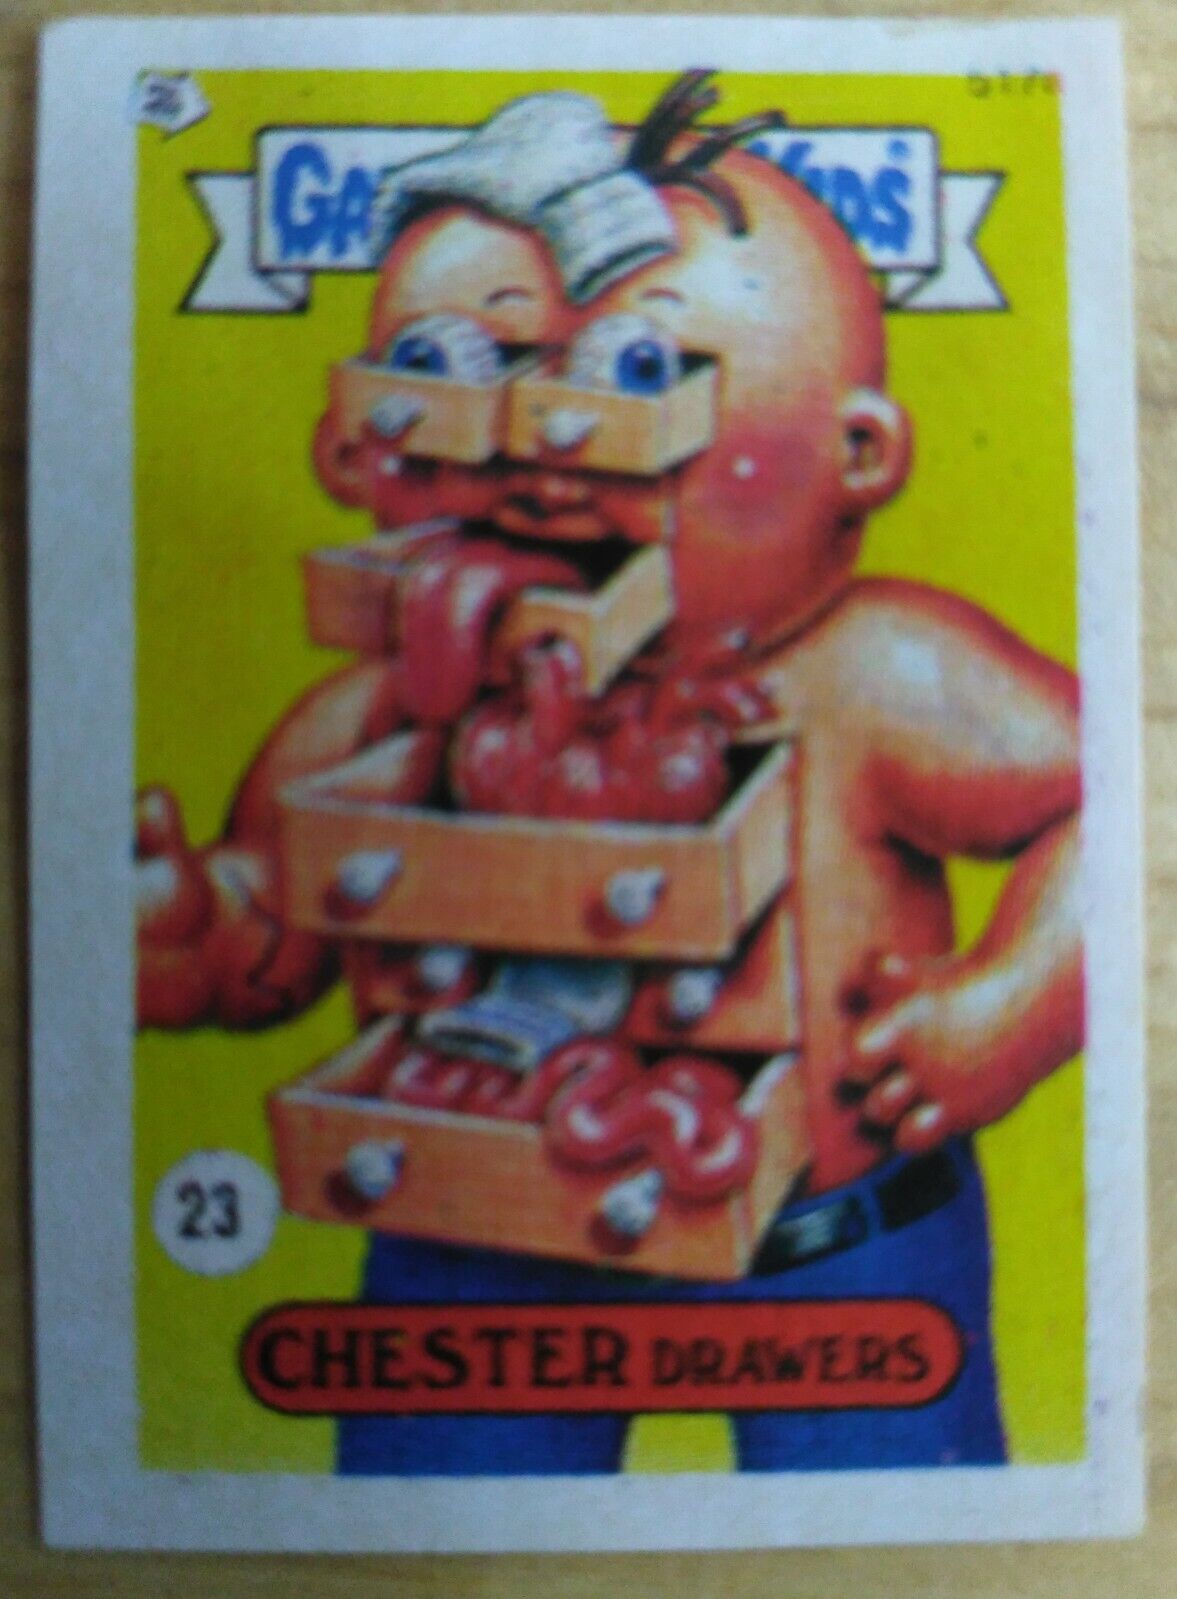 Rare Colombian Garbage Pail Kids Mini Single #23 Chester Drawers